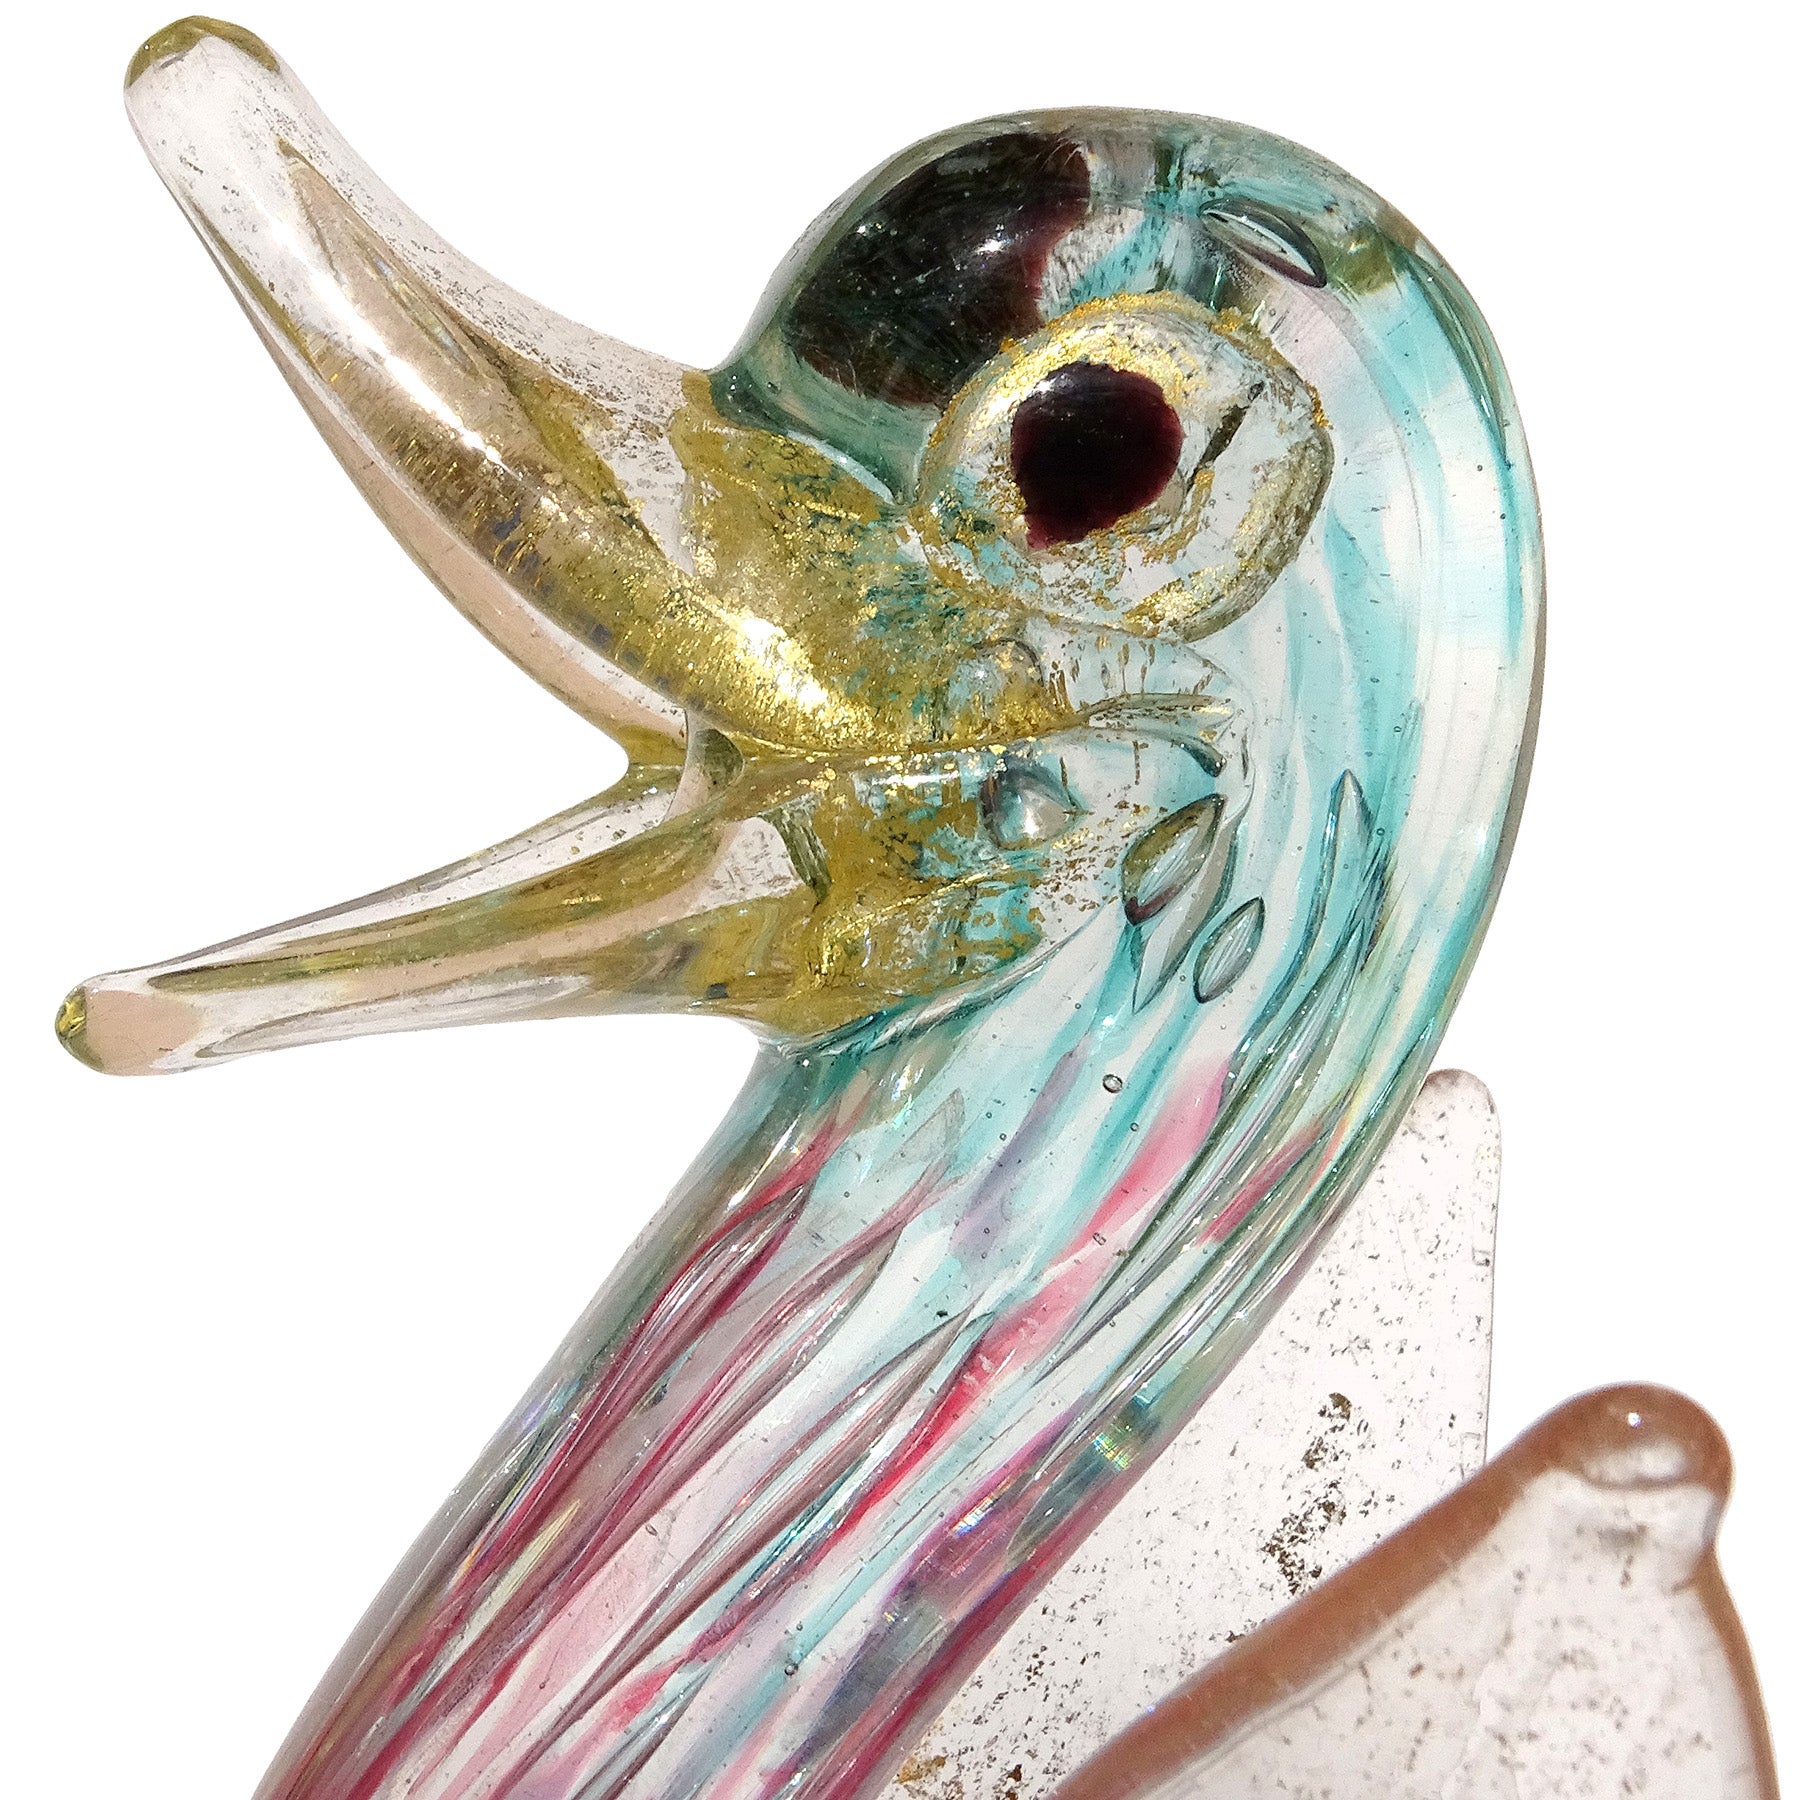 Beautiful vintage Murano hand blown teal green, pink, gold flecks and bubbles Italian art glass little bird figurine. Documented to the Barovier e Toso company. I have owned many of hem with labels. The bird is made with clear glass and controlled